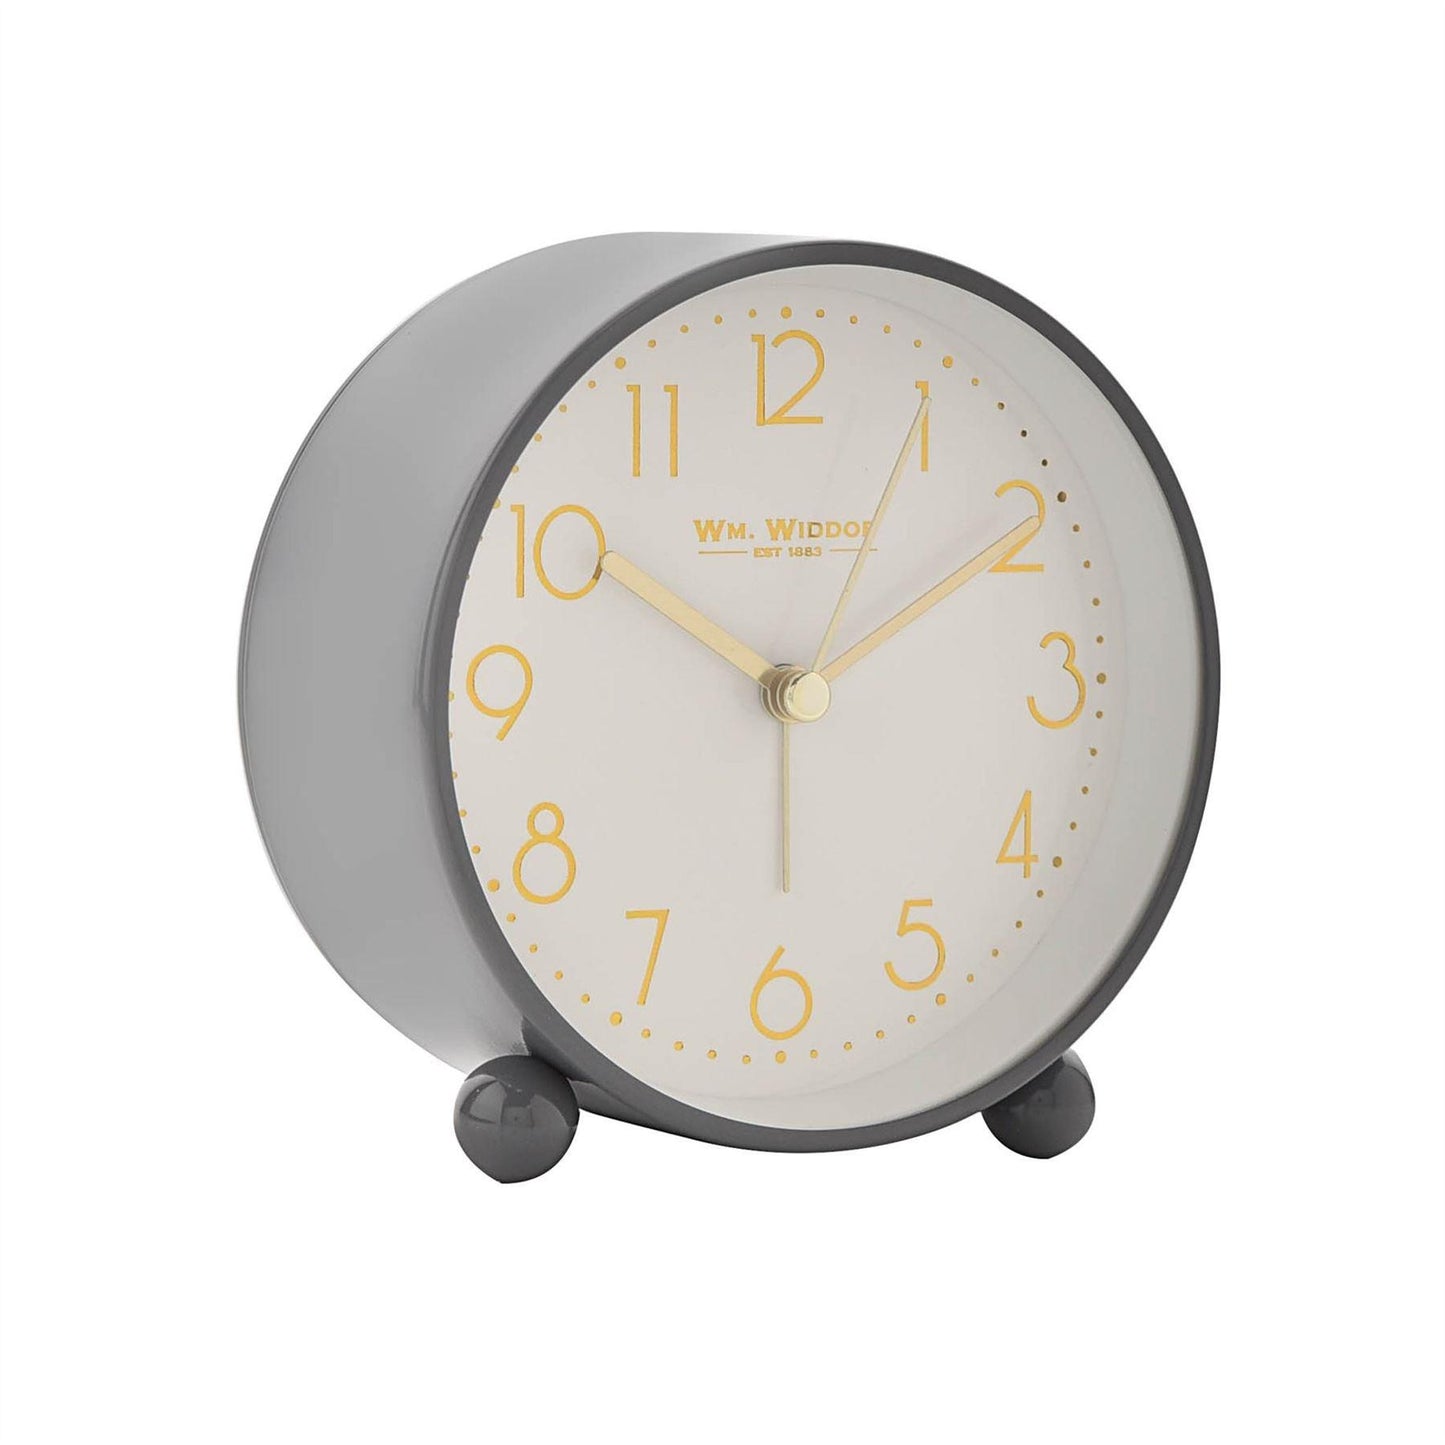 William Widdop Metal Alarm Clock Wtith Gold Dial 5175 Available Multiple Colour